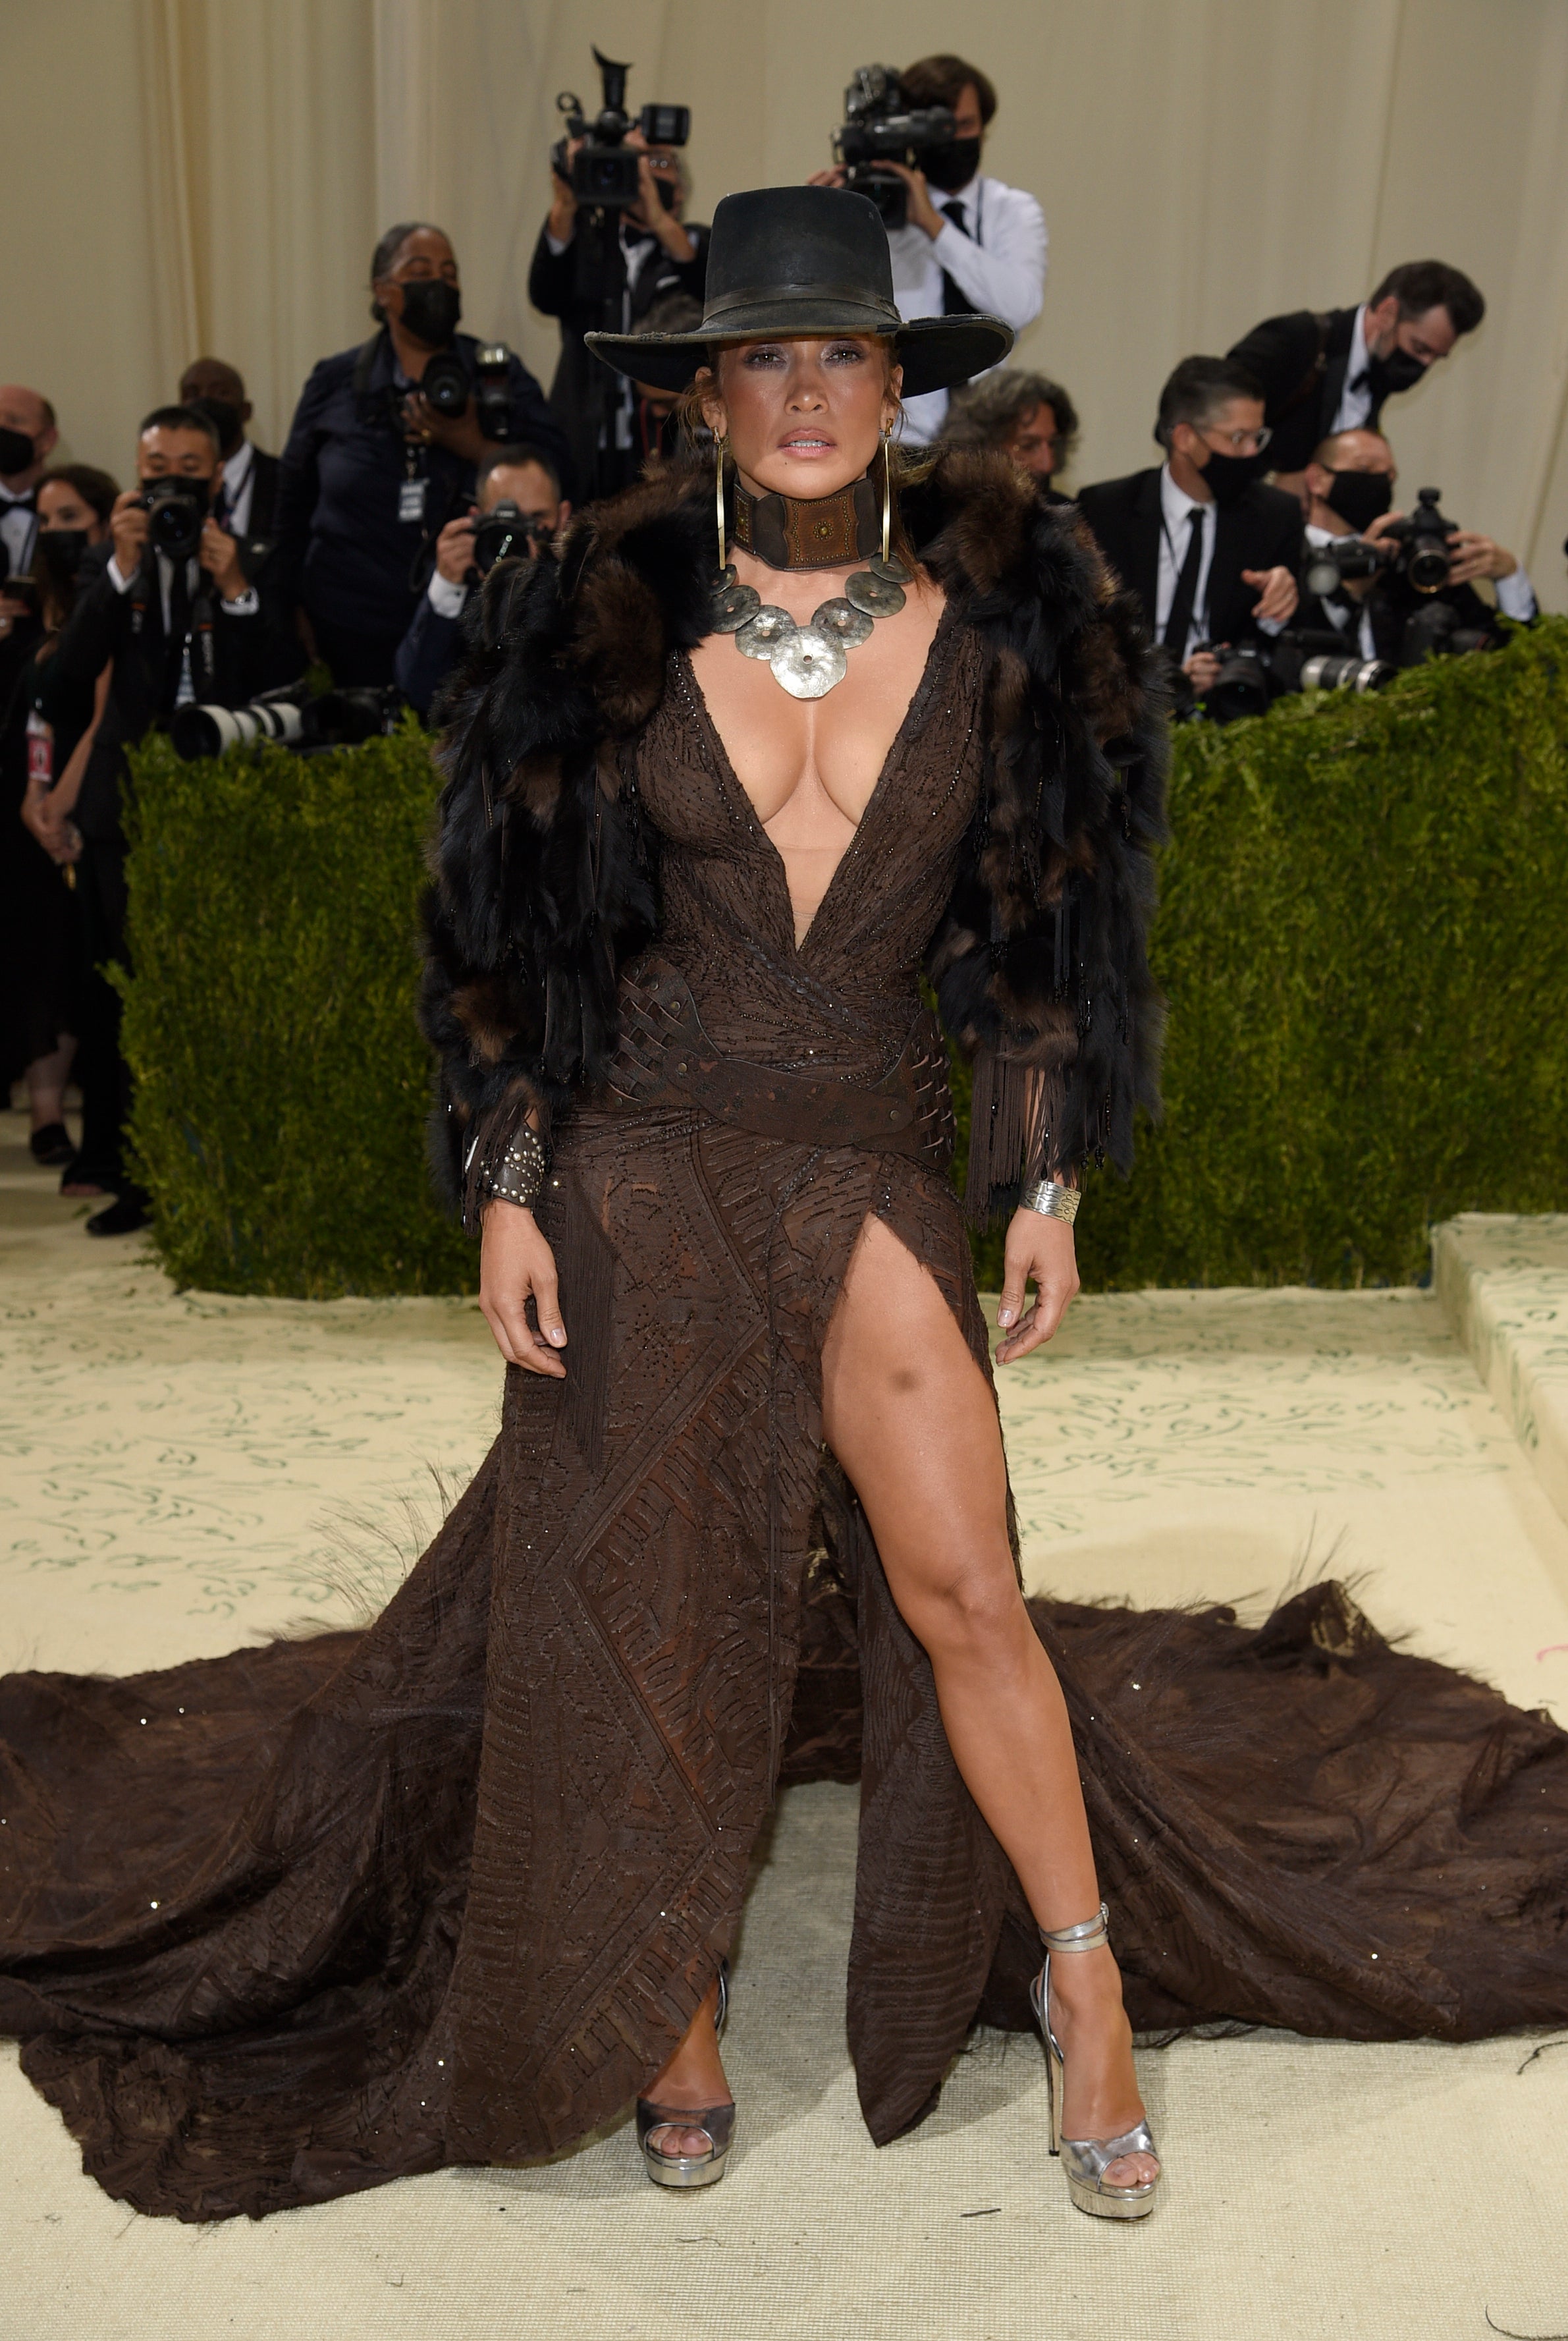 Jennifer Lopez seemed to reference the Wild West at a Met Gala celebrating American fashion (Evan Agostini/Invision/AP)